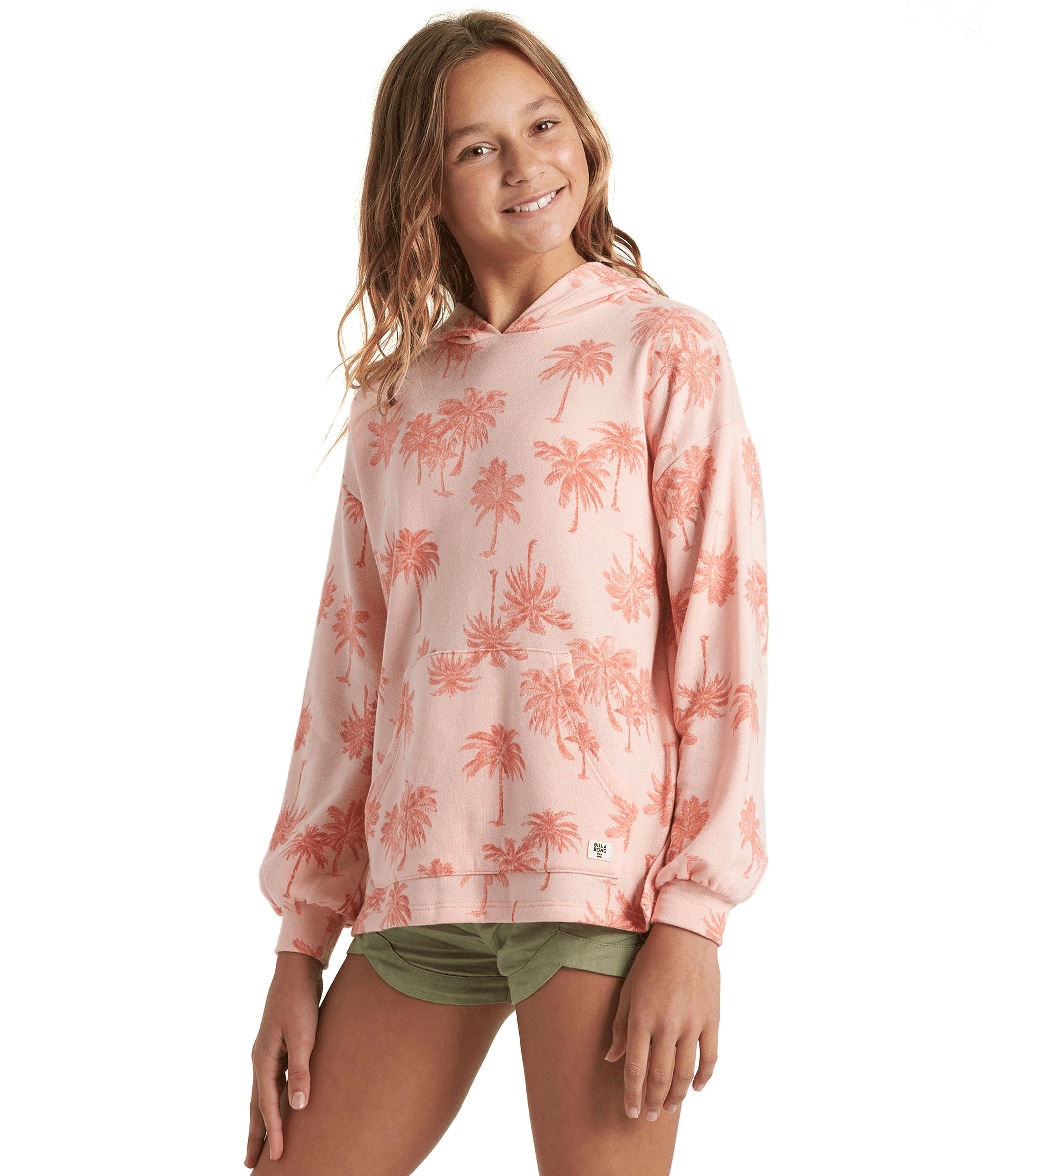 Billabong Girls' Palms Forever Long Sleeve Hoodie - Peachy Small 7/28 Cotton/Polyester - Swimoutlet.com